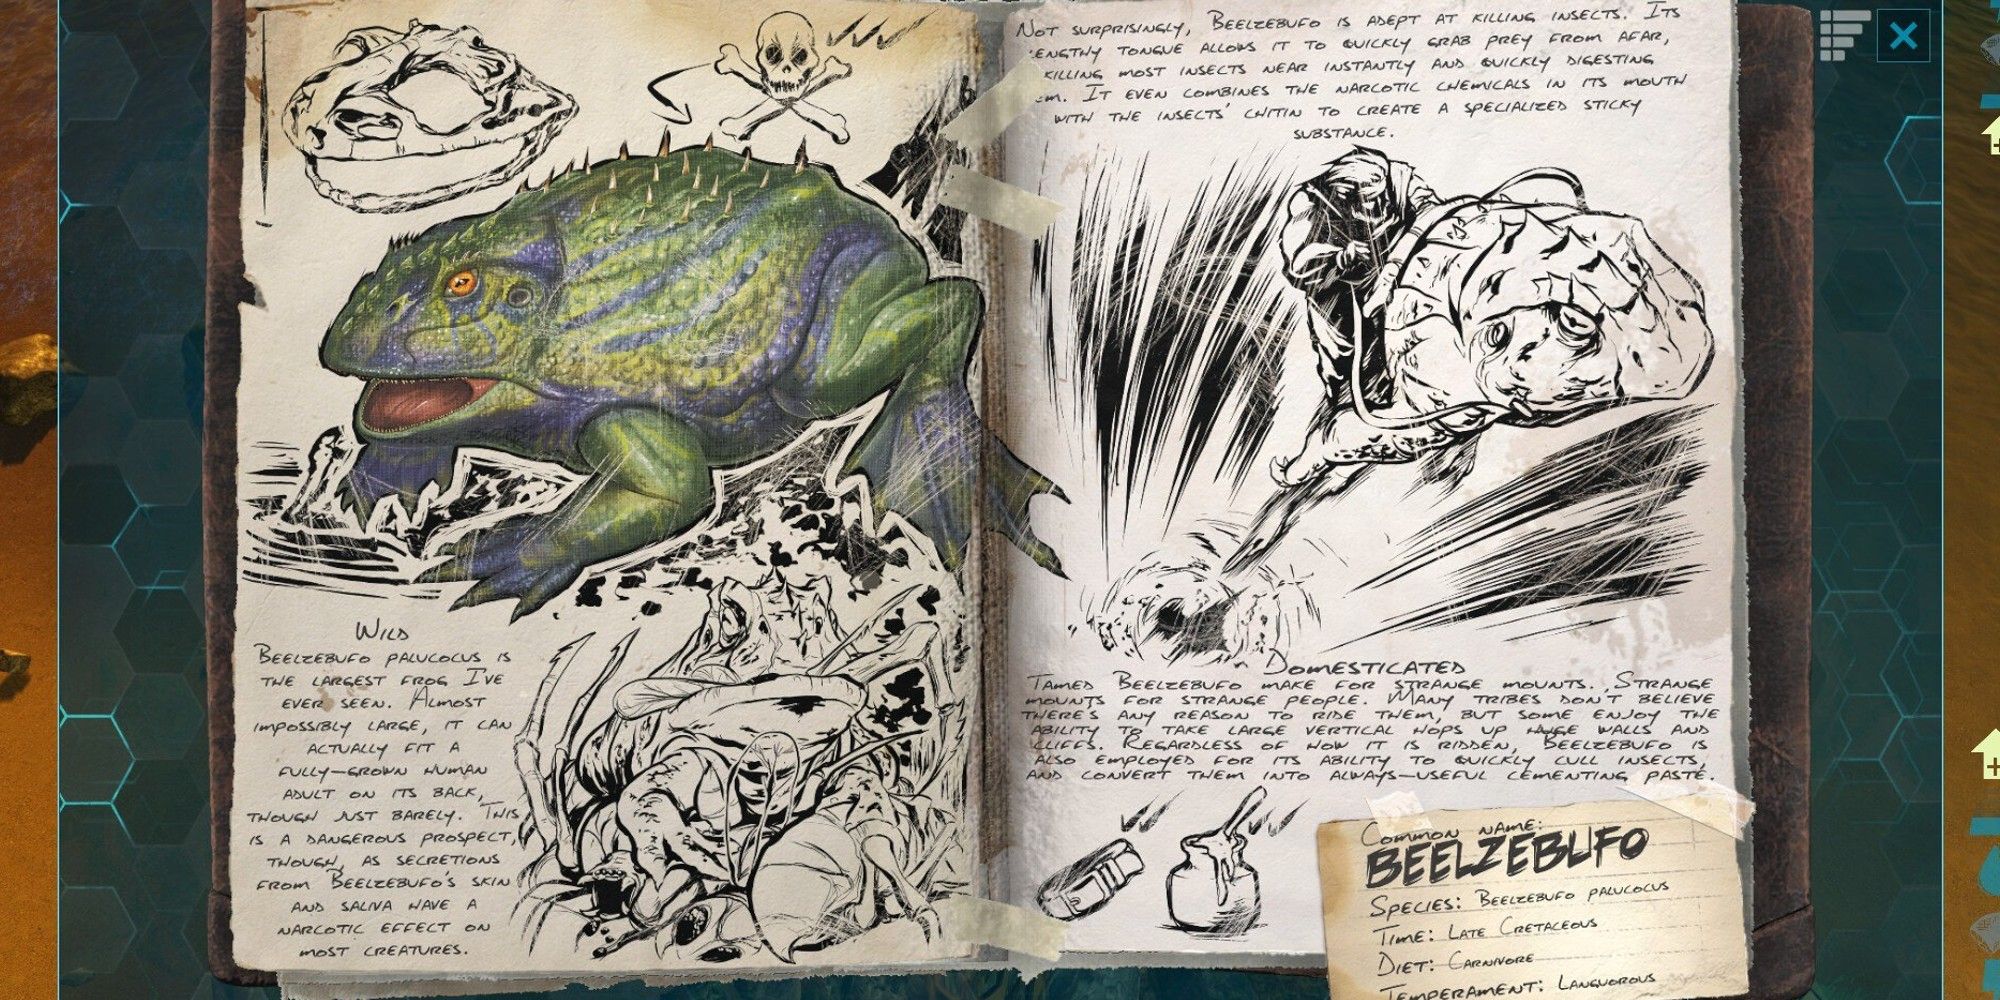 dossier file page for Beelzebufo